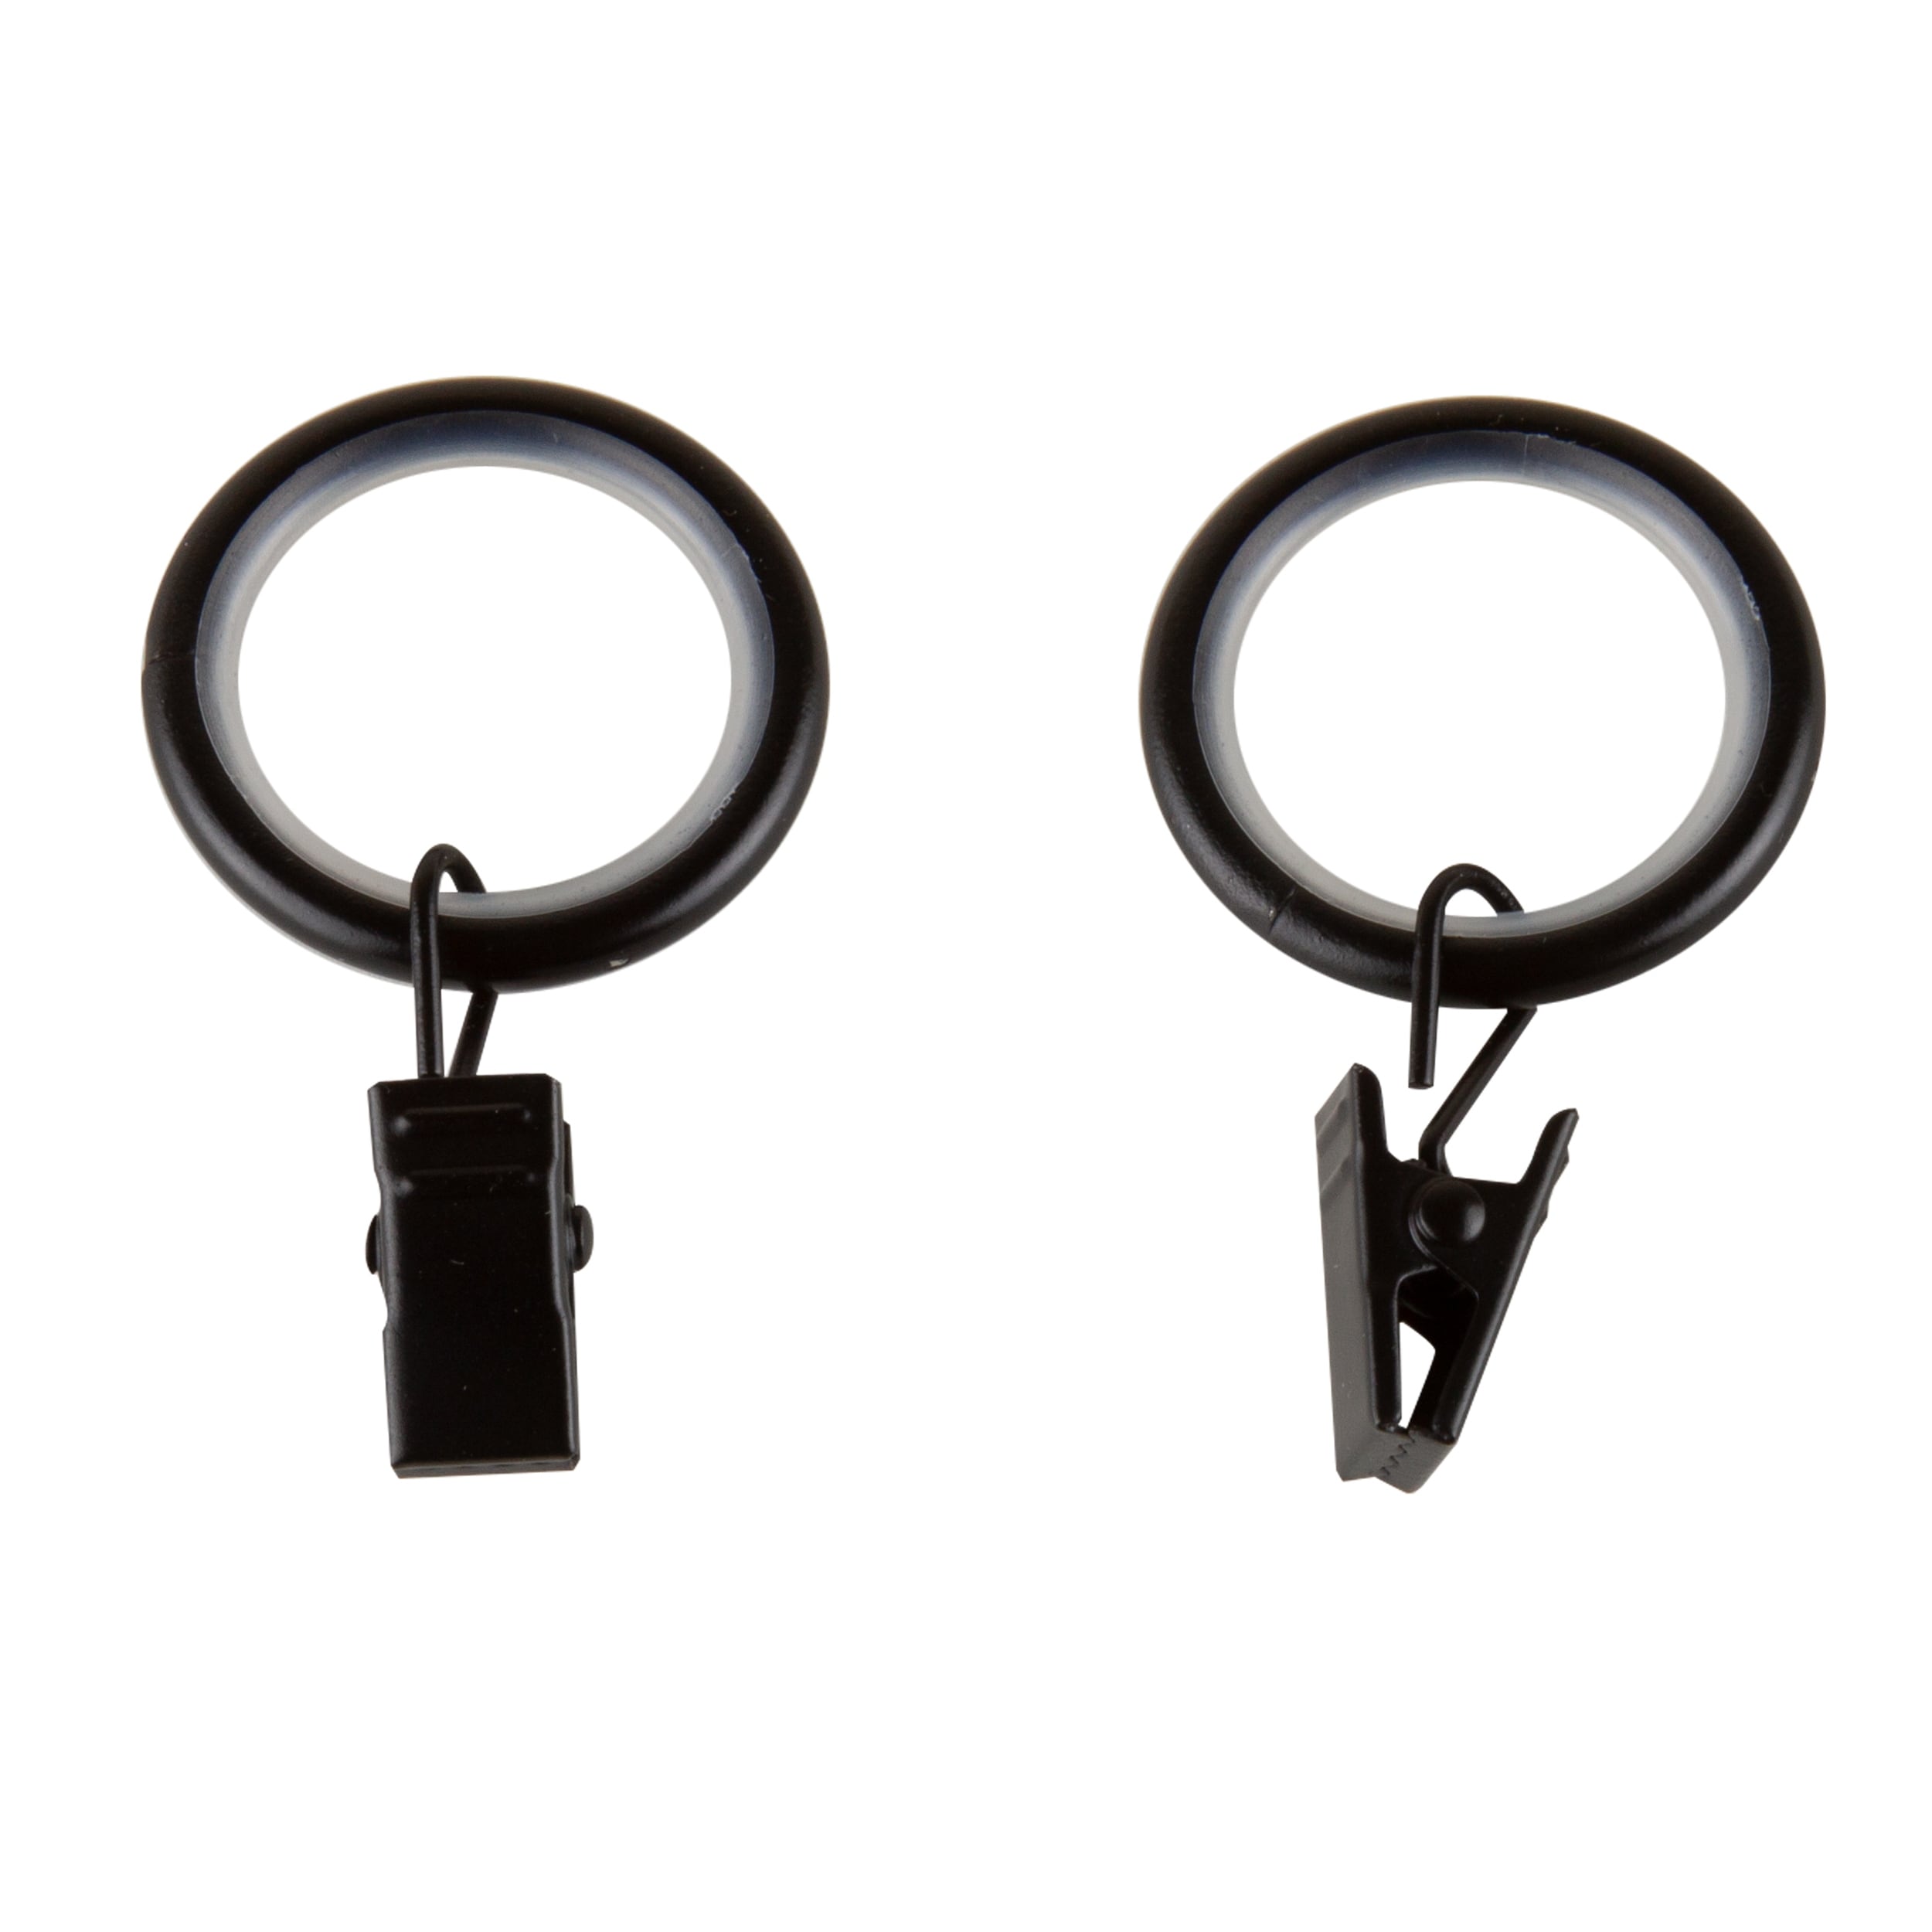 Mix & Match Wood Curtain Rings (7-Pack) - On Sale - Bed Bath & Beyond -  35977350